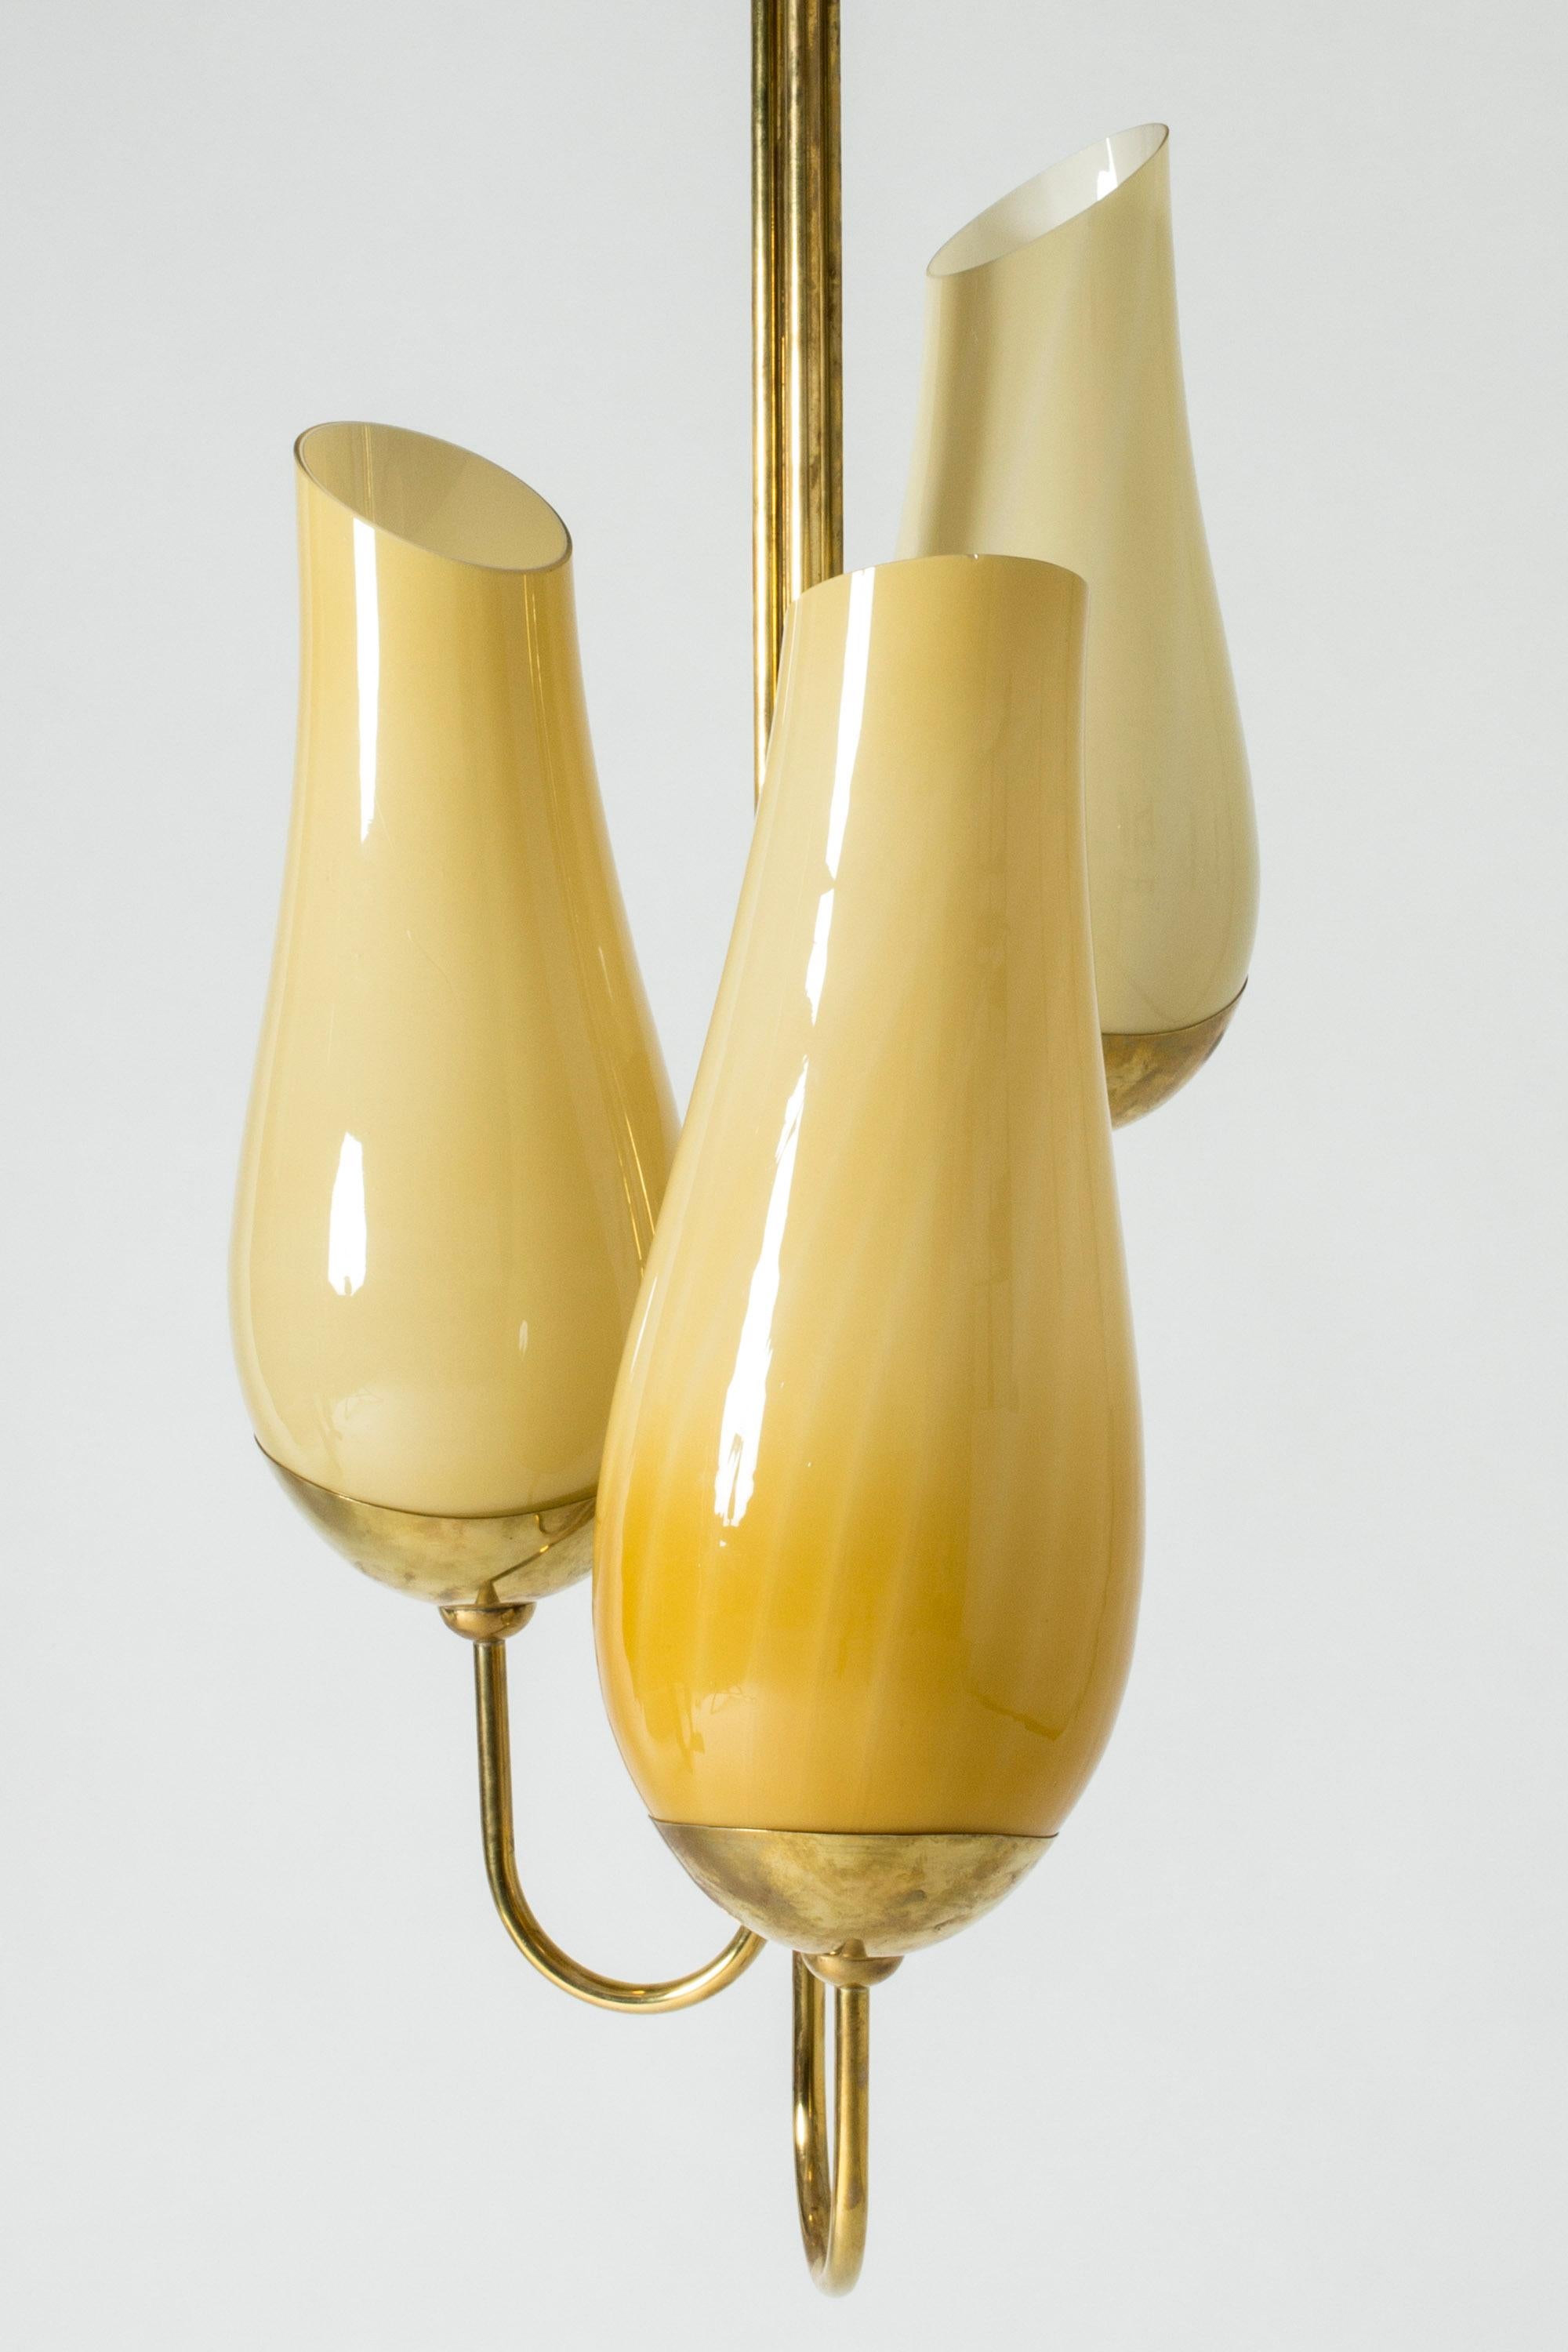 Scandinavian Modern Brass and Glass Cgandelier by Paavo Tynell and Gunnel Nyman for Taito Oy, 1940s For Sale